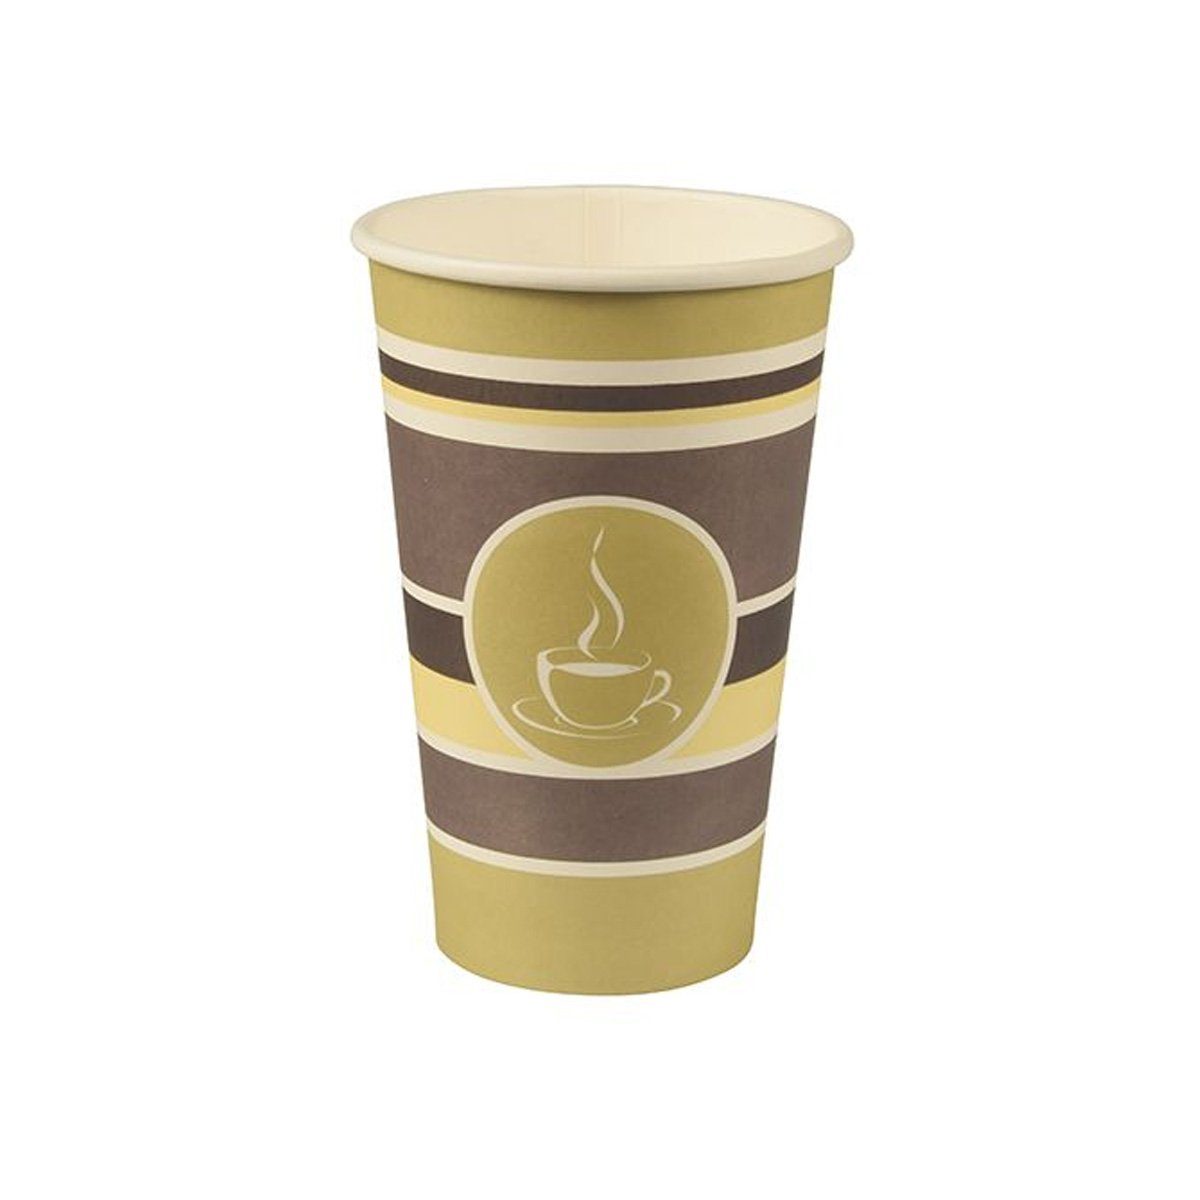 PAPSTAR Coffee-to-go-Becher, Pappe